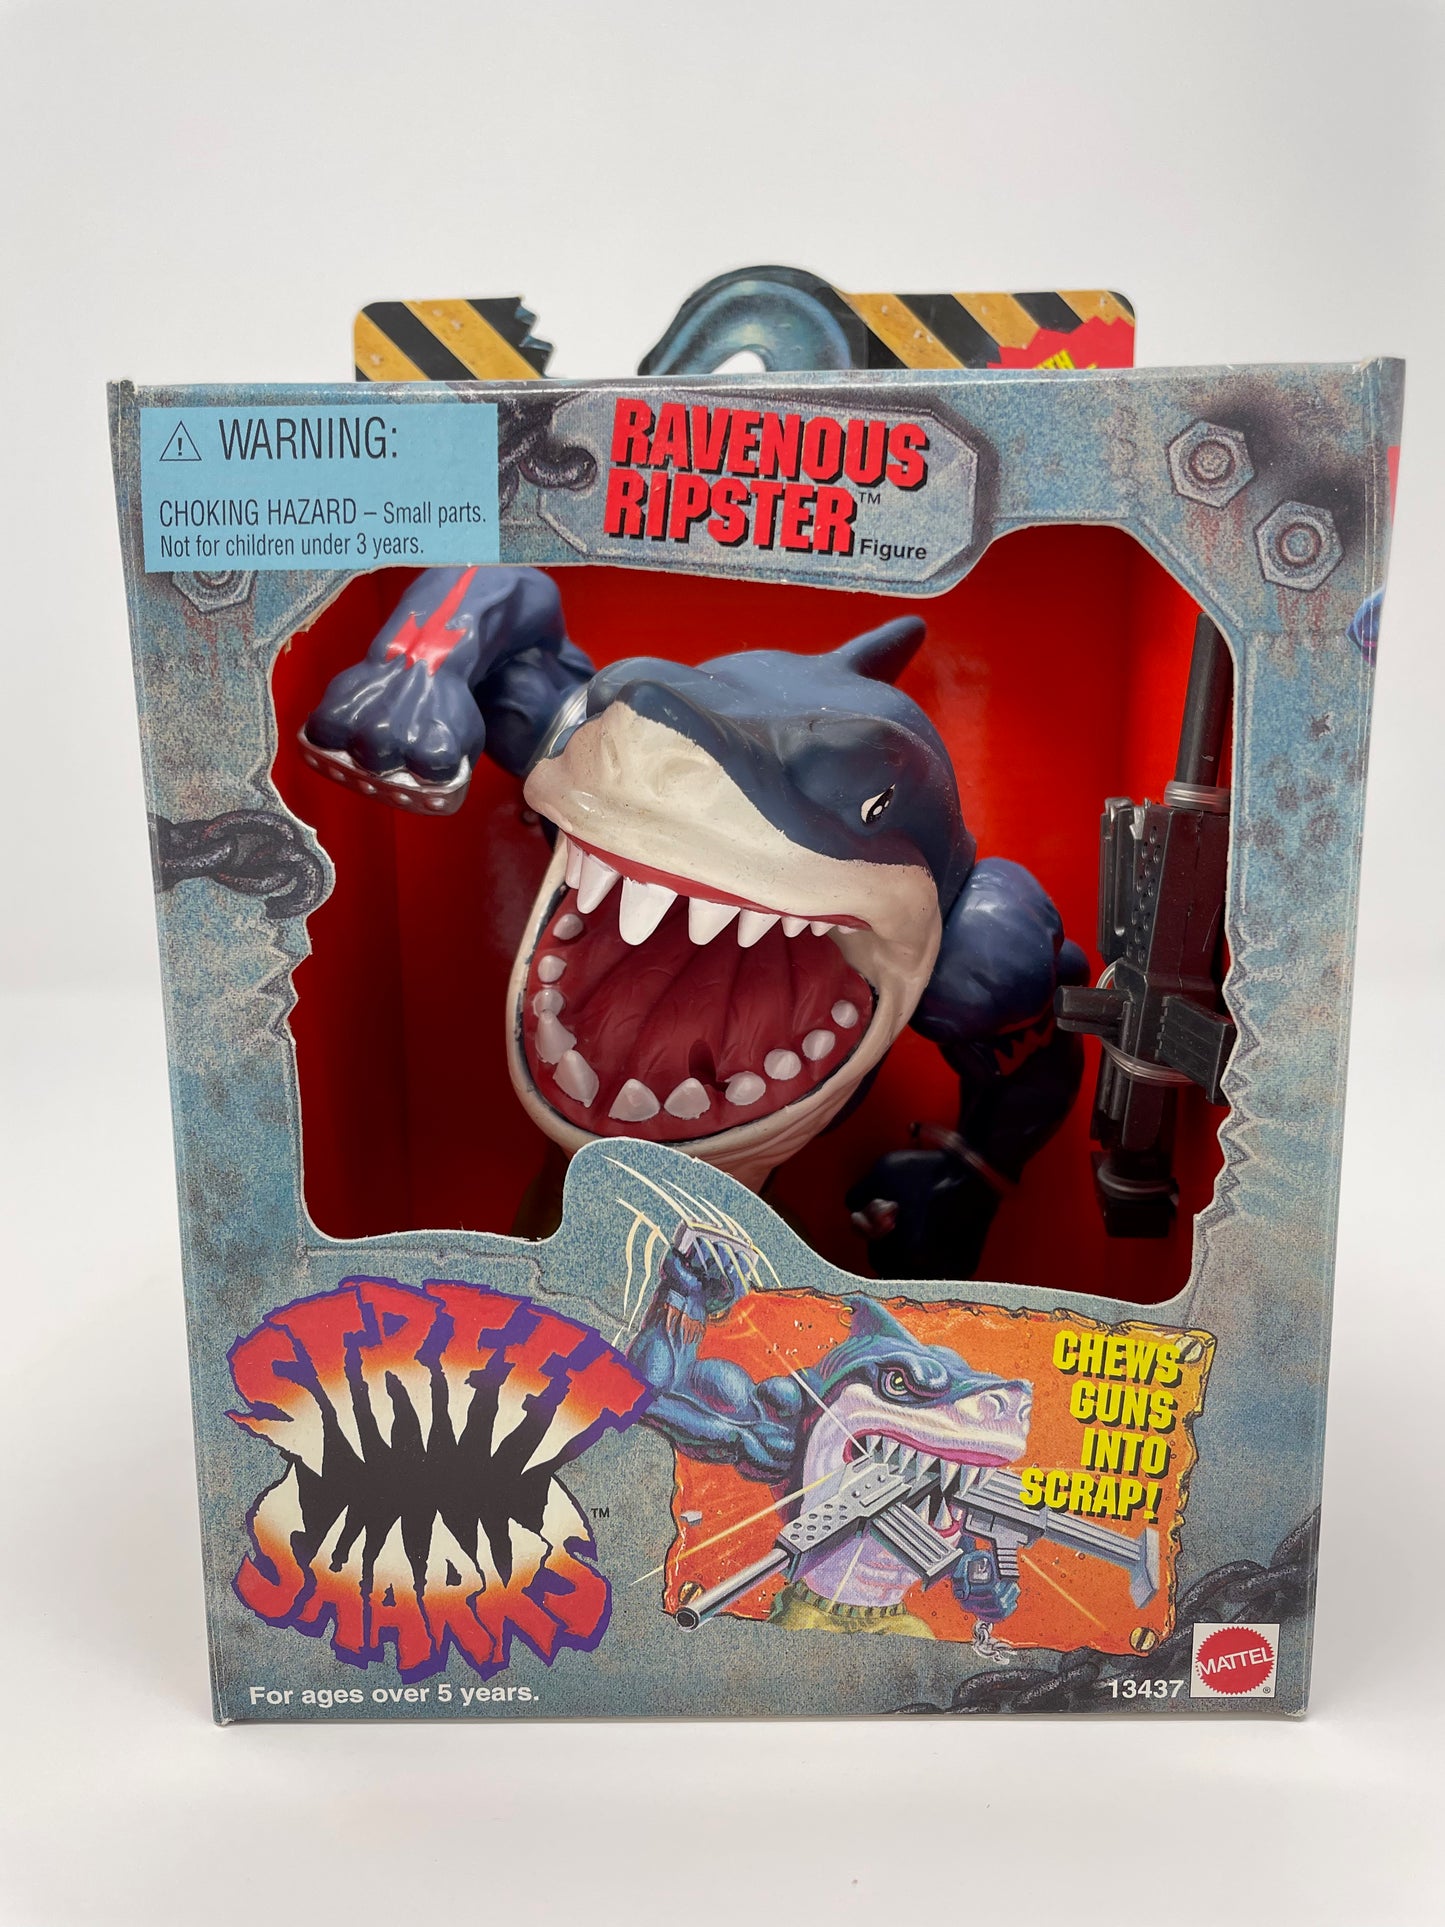 Ravenous Ripster - Street Sharks Wave II (3 of 4)